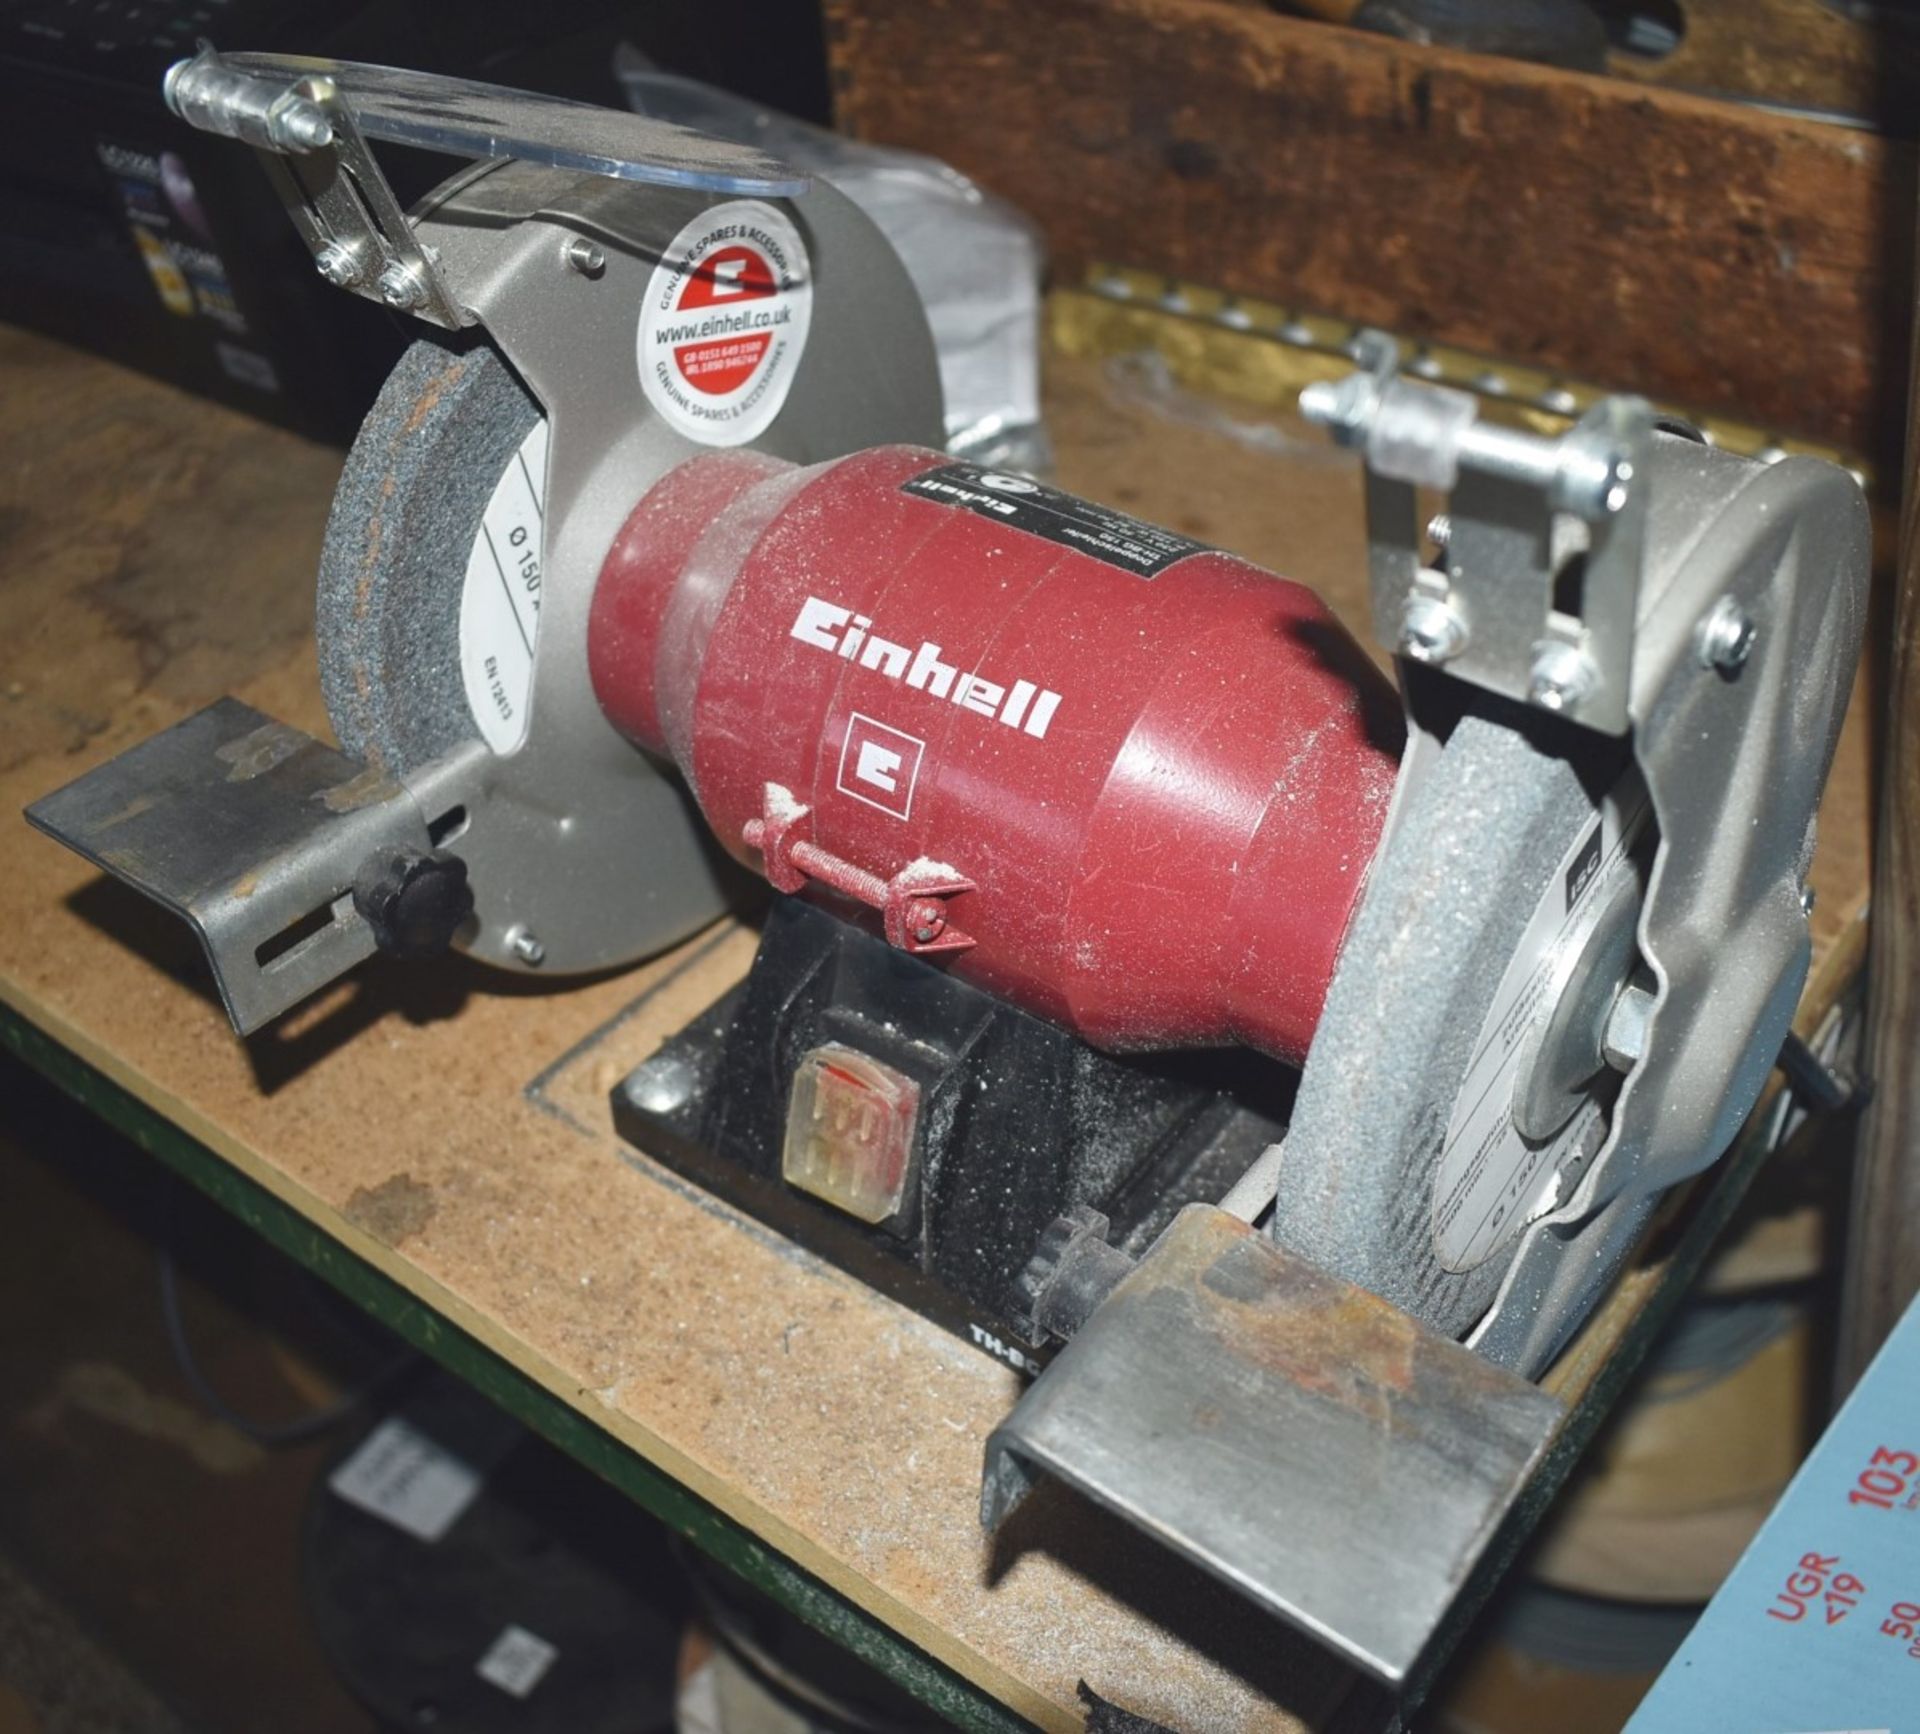 1 x Einhell TH-BG 150 Bench Grinder - 2980 RPM, 150mm x 16mm Coarse and Fine Grinding Wheels - Image 2 of 3